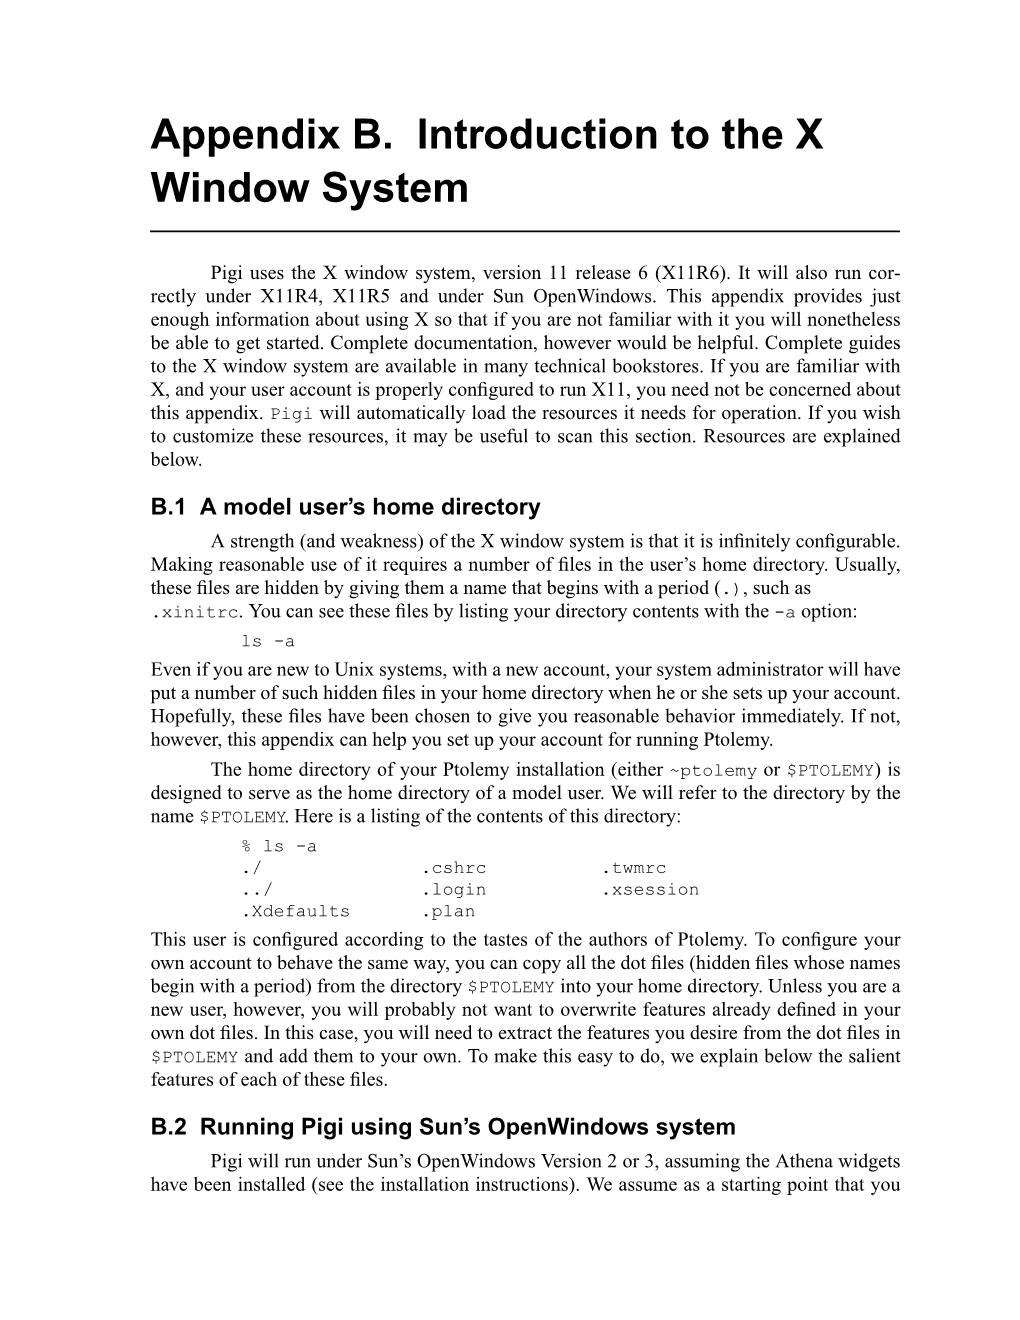 Appendix B. Introduction to the X Window System